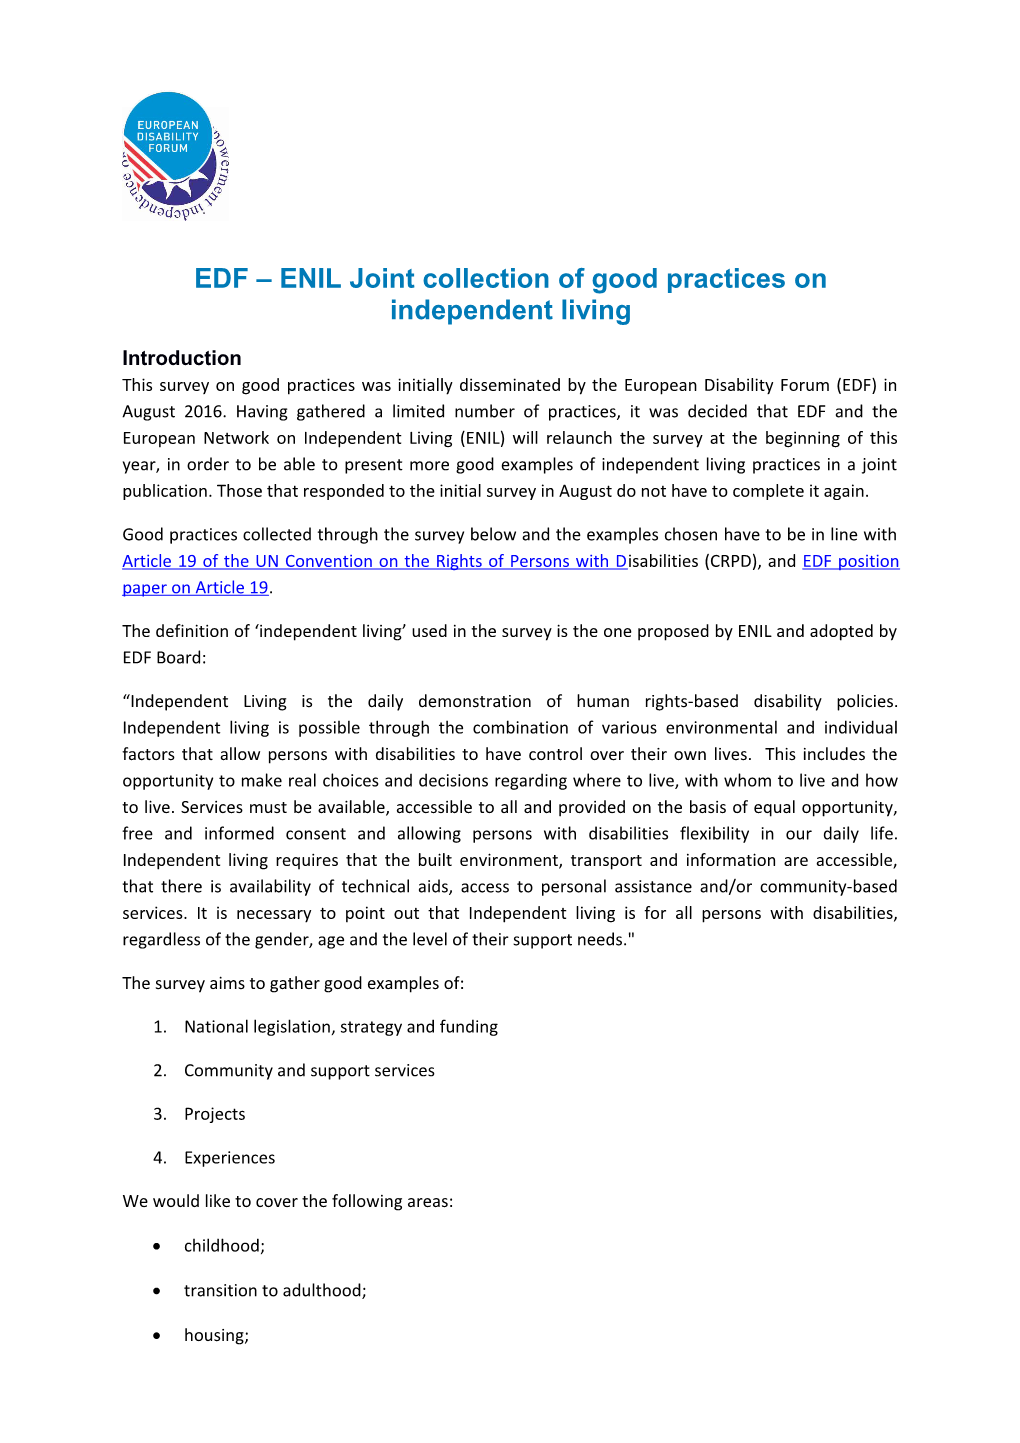 EDF ENIL Joint Collection of Good Practices on Independent Living